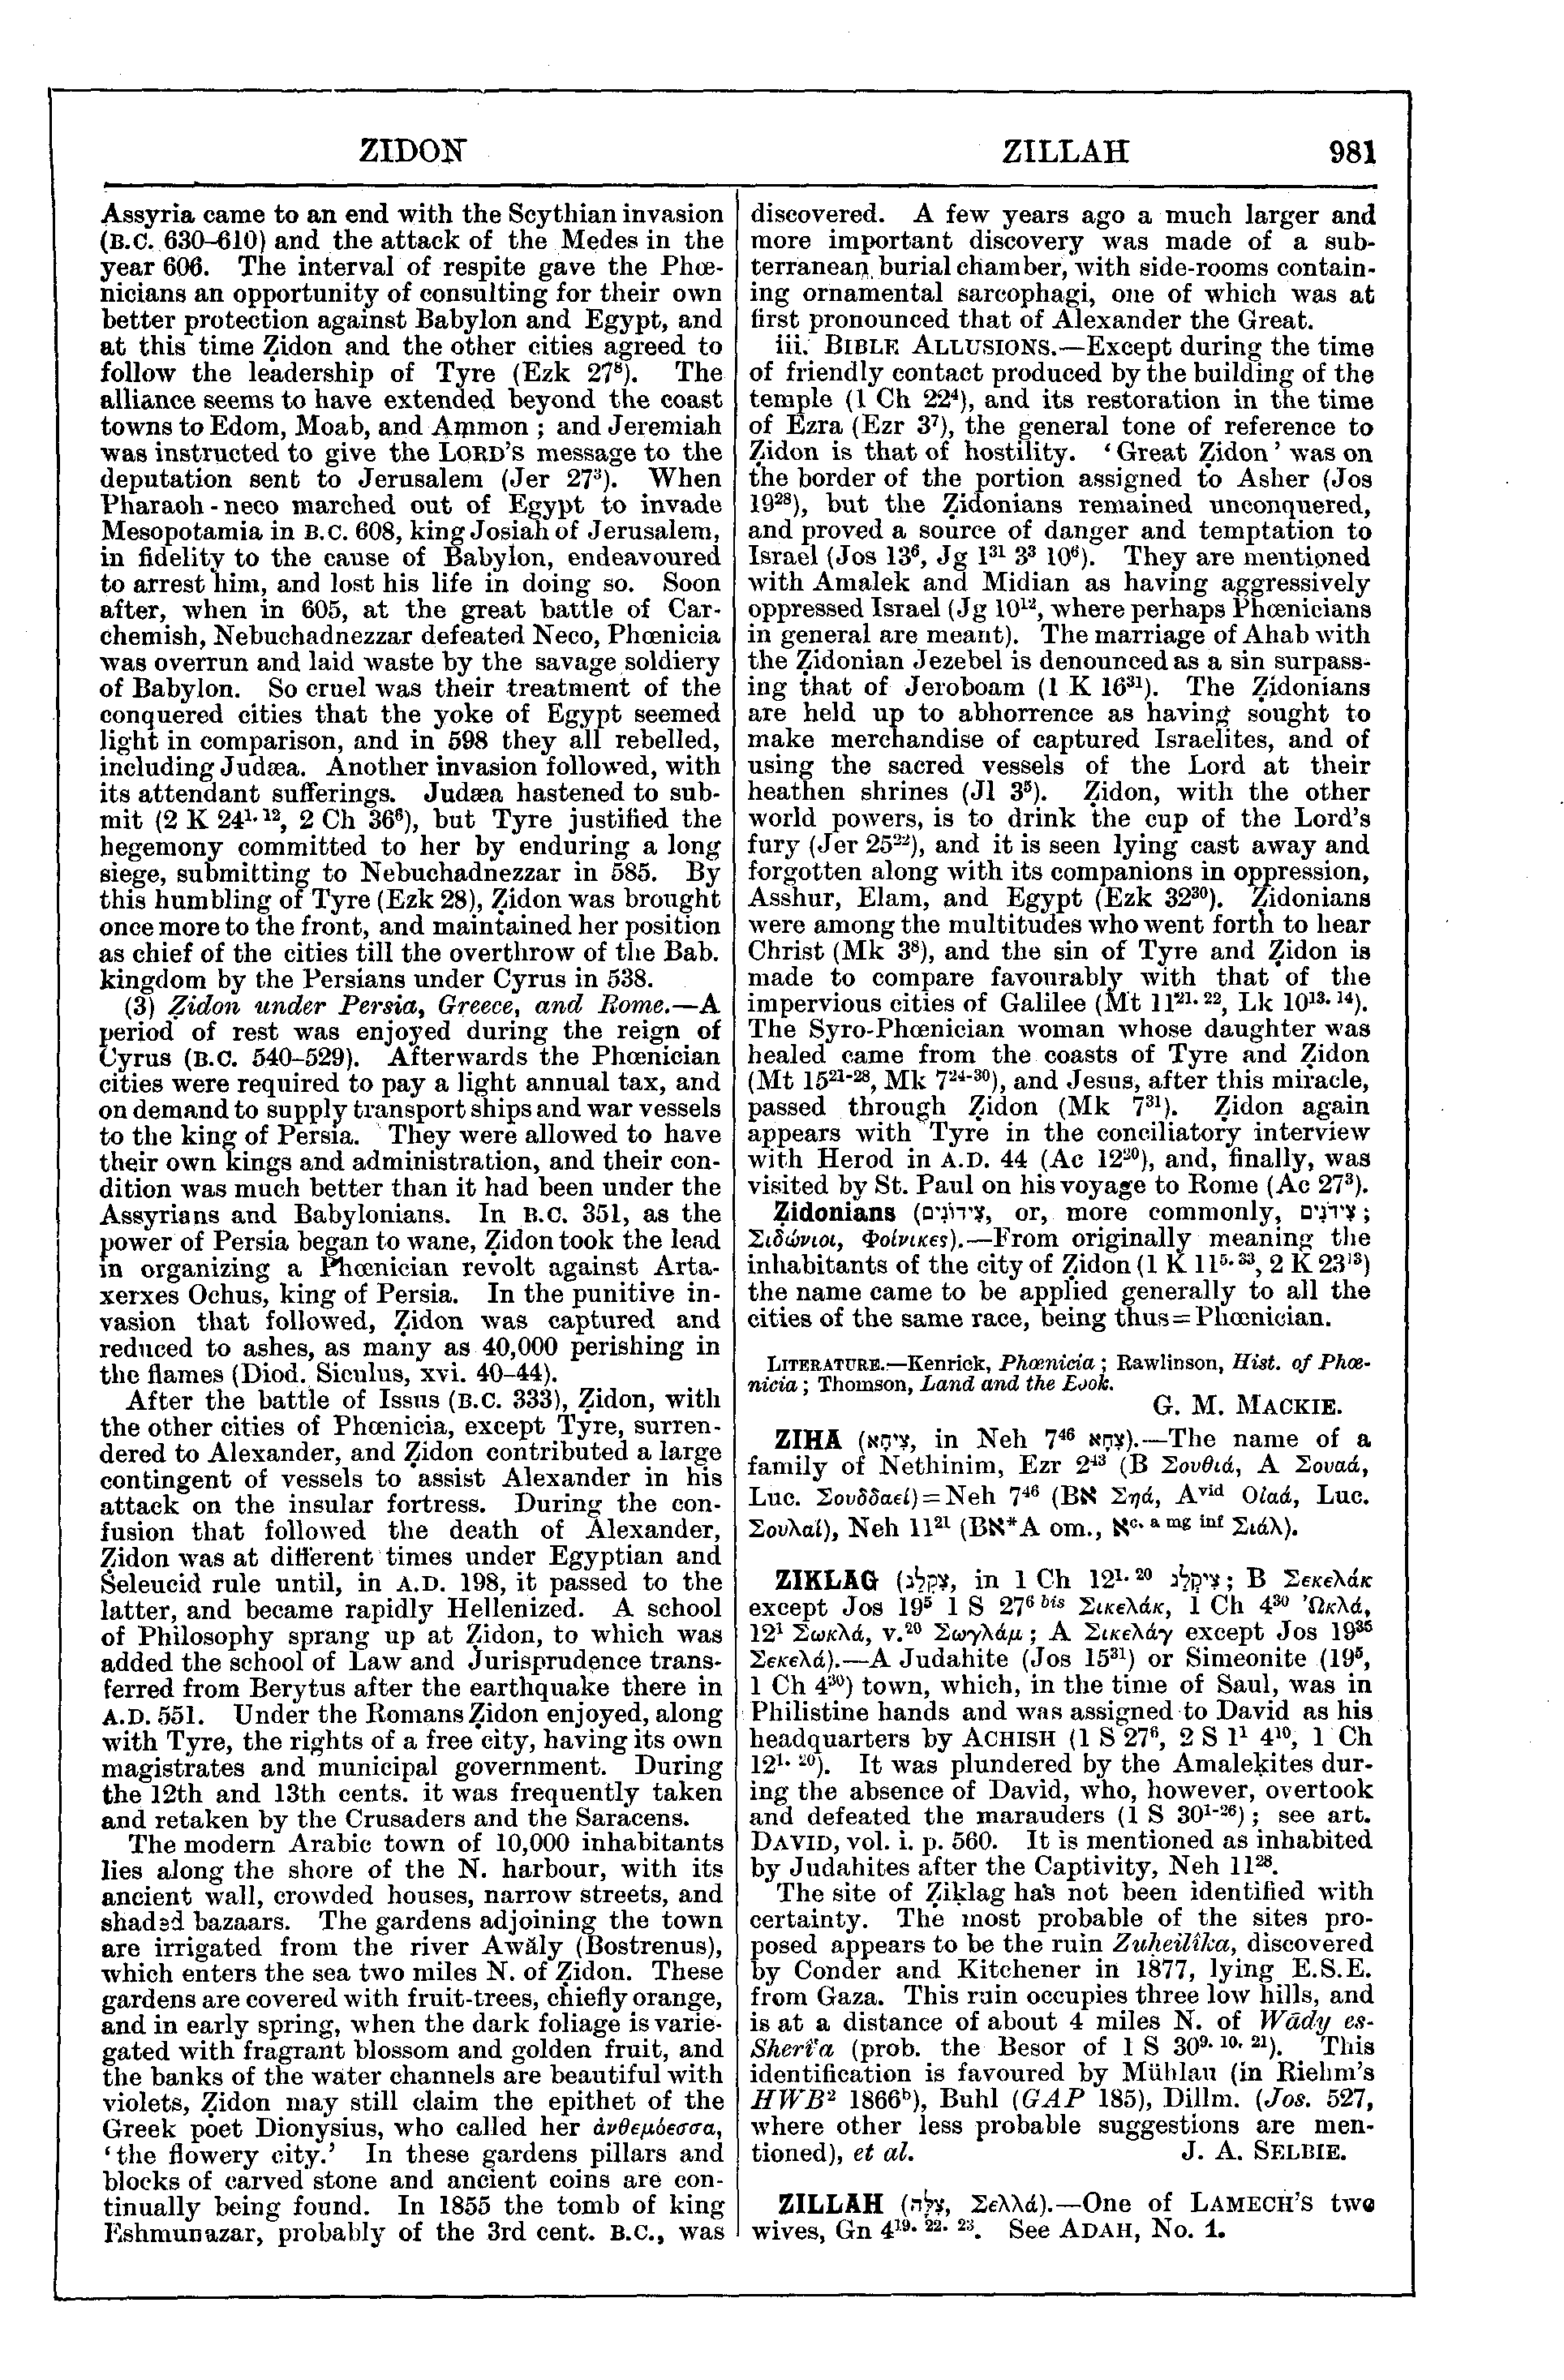 Image of page 981